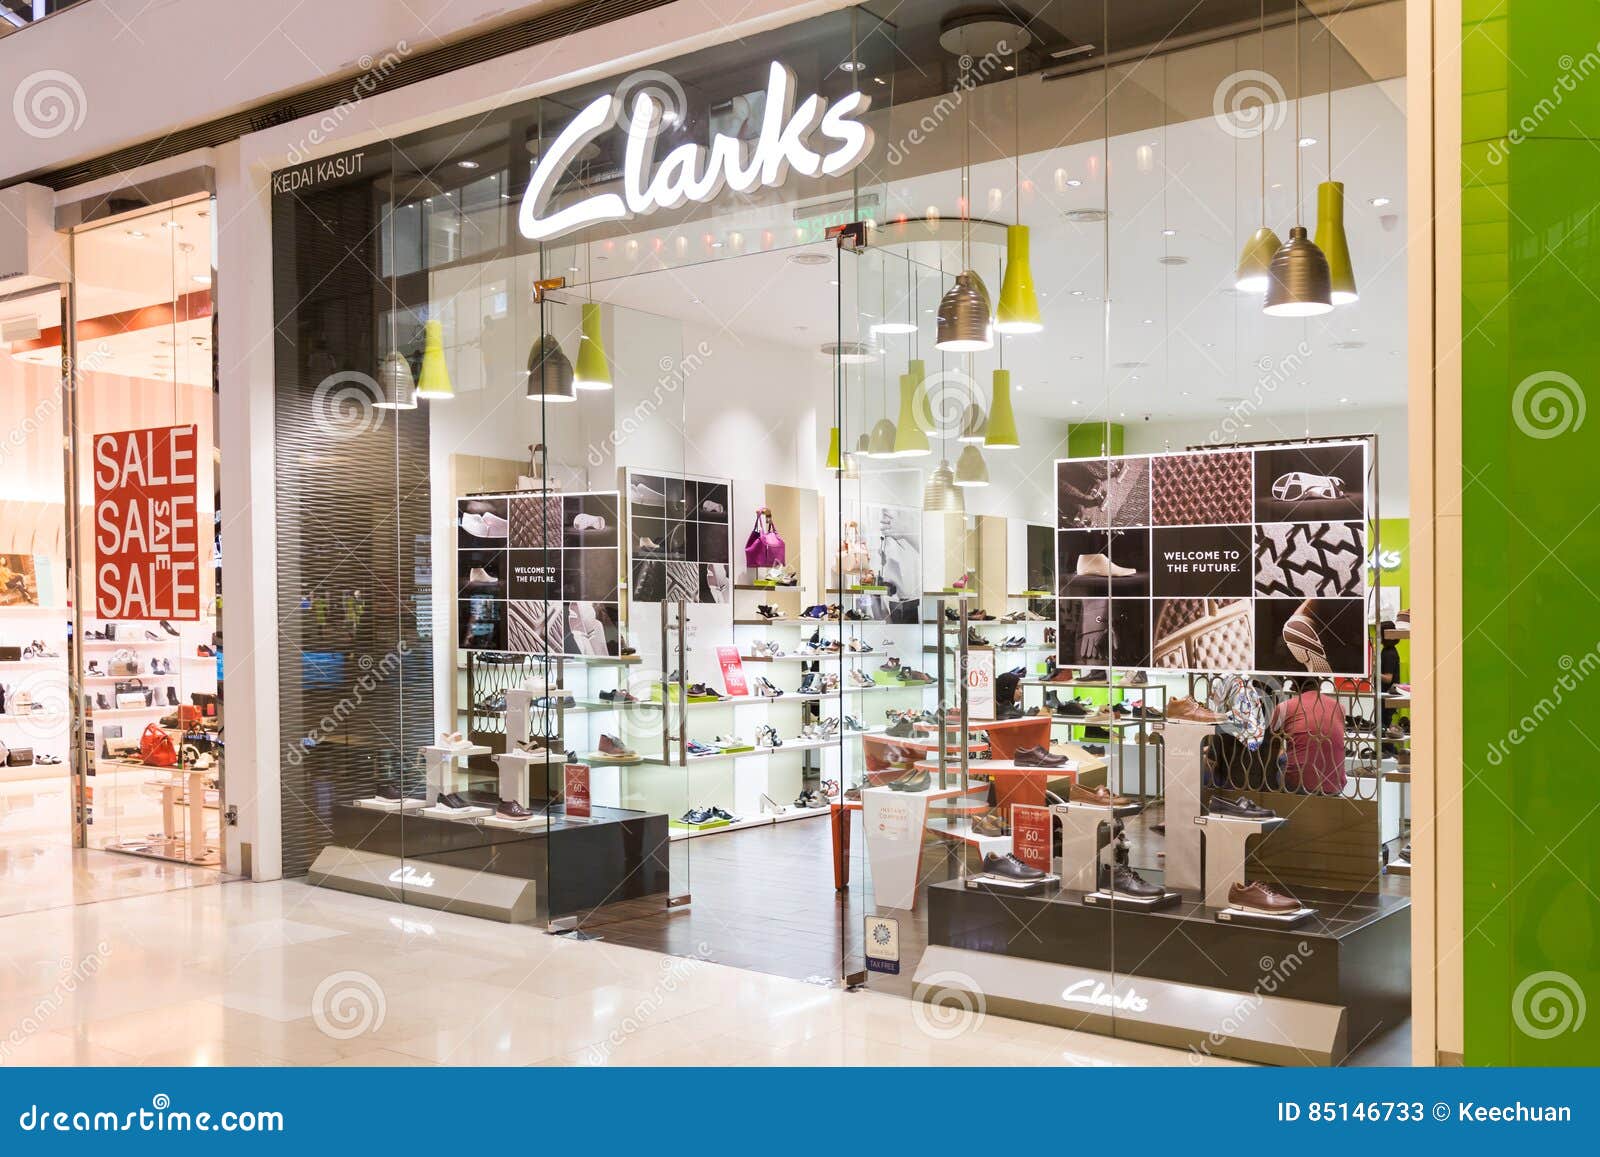 clarks online store malaysia